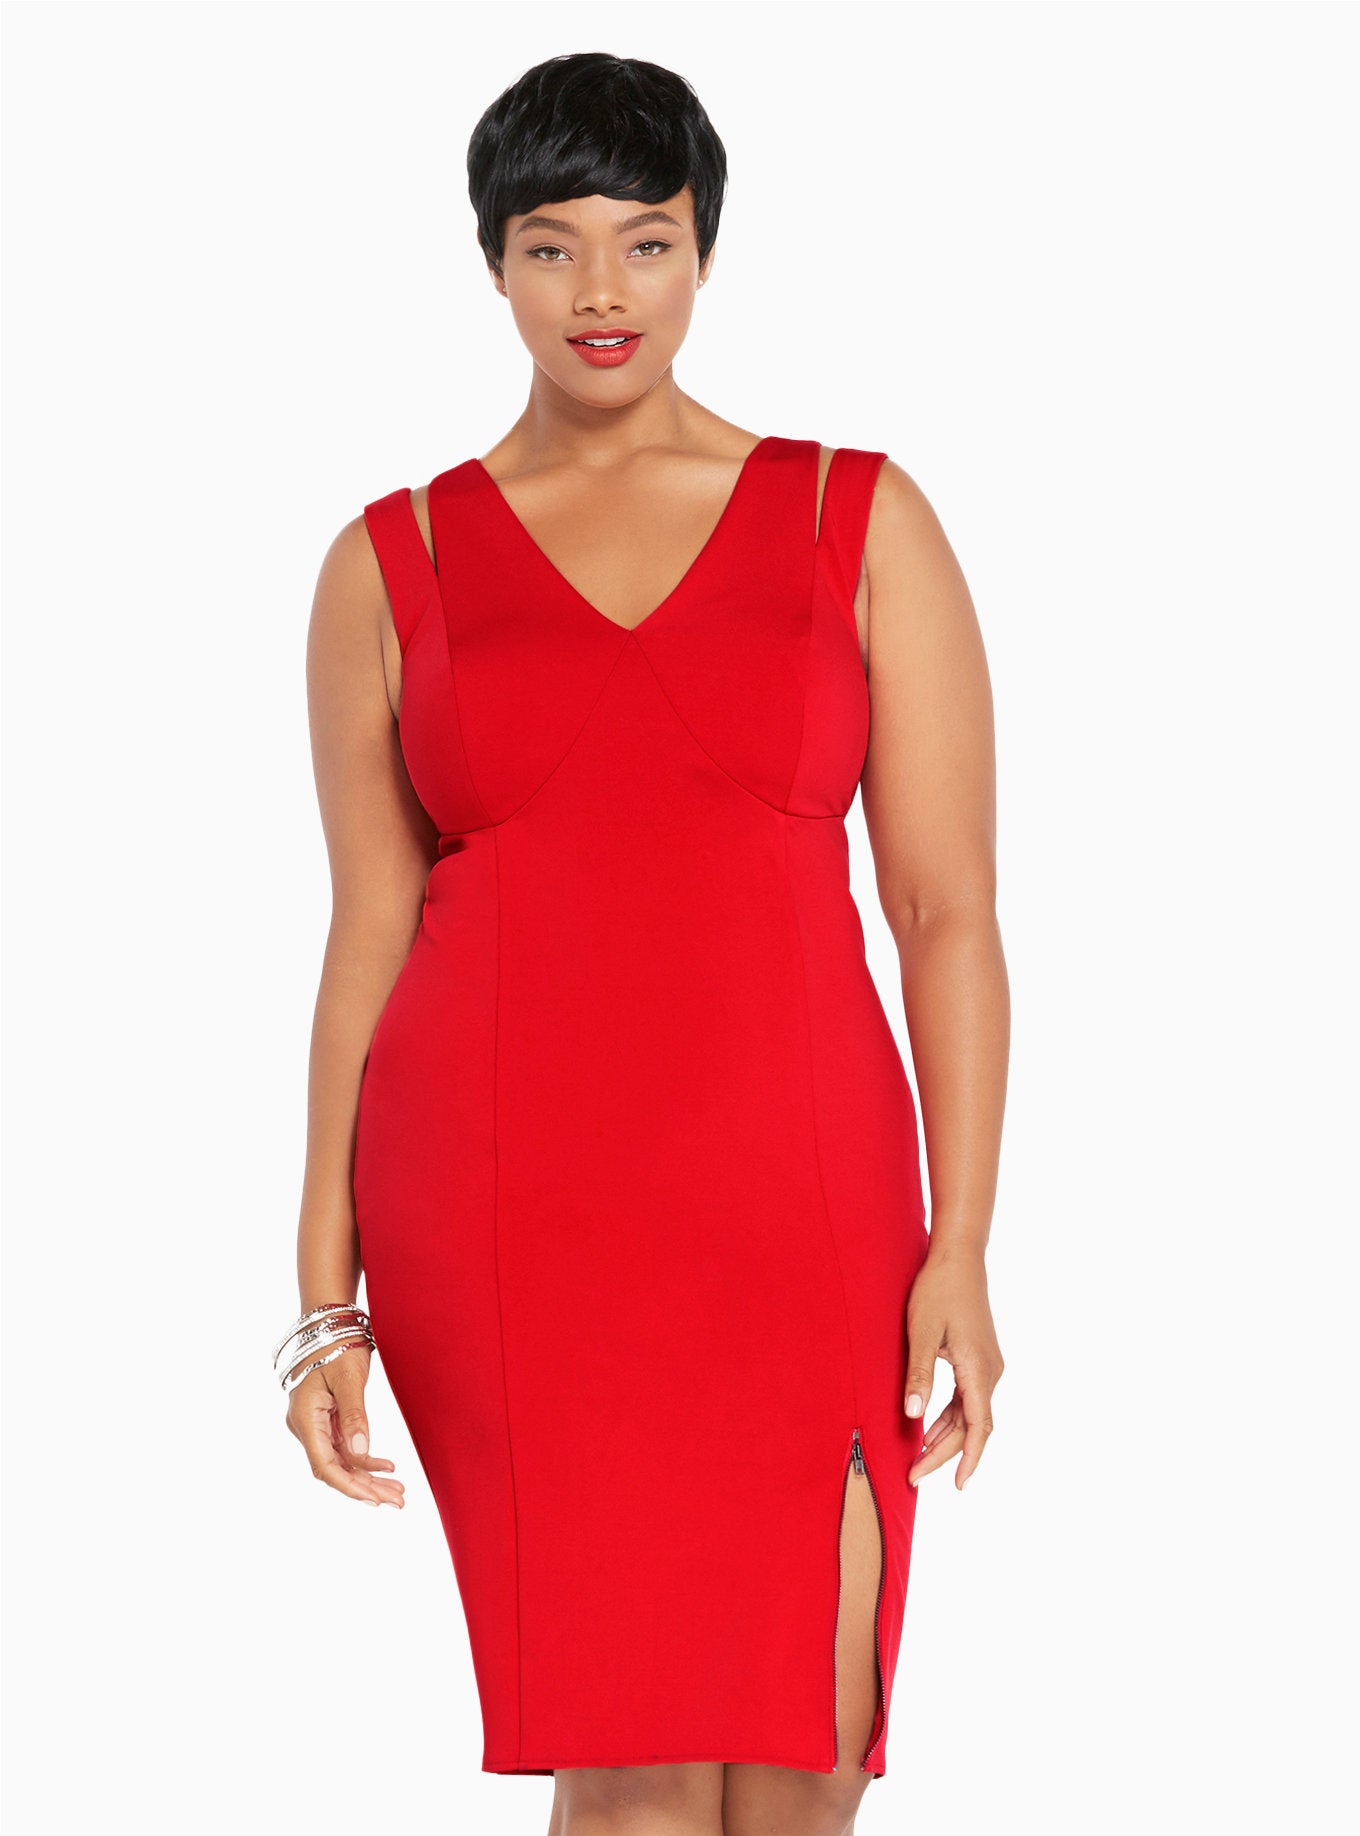 The 10 Red Dresses That Will Set Your Valentine’s Day Off